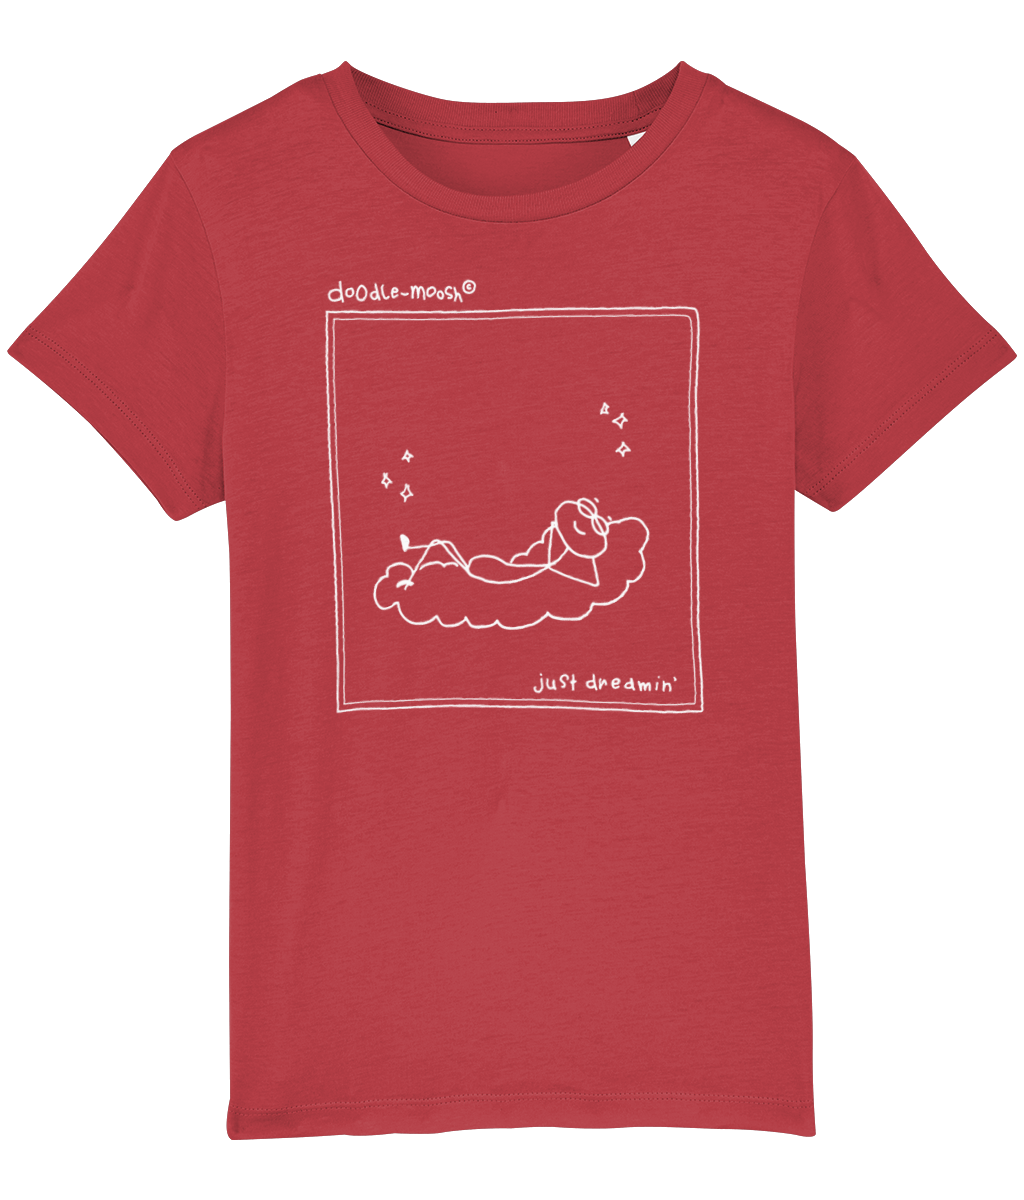 Just dreaming t-shirt, red with white